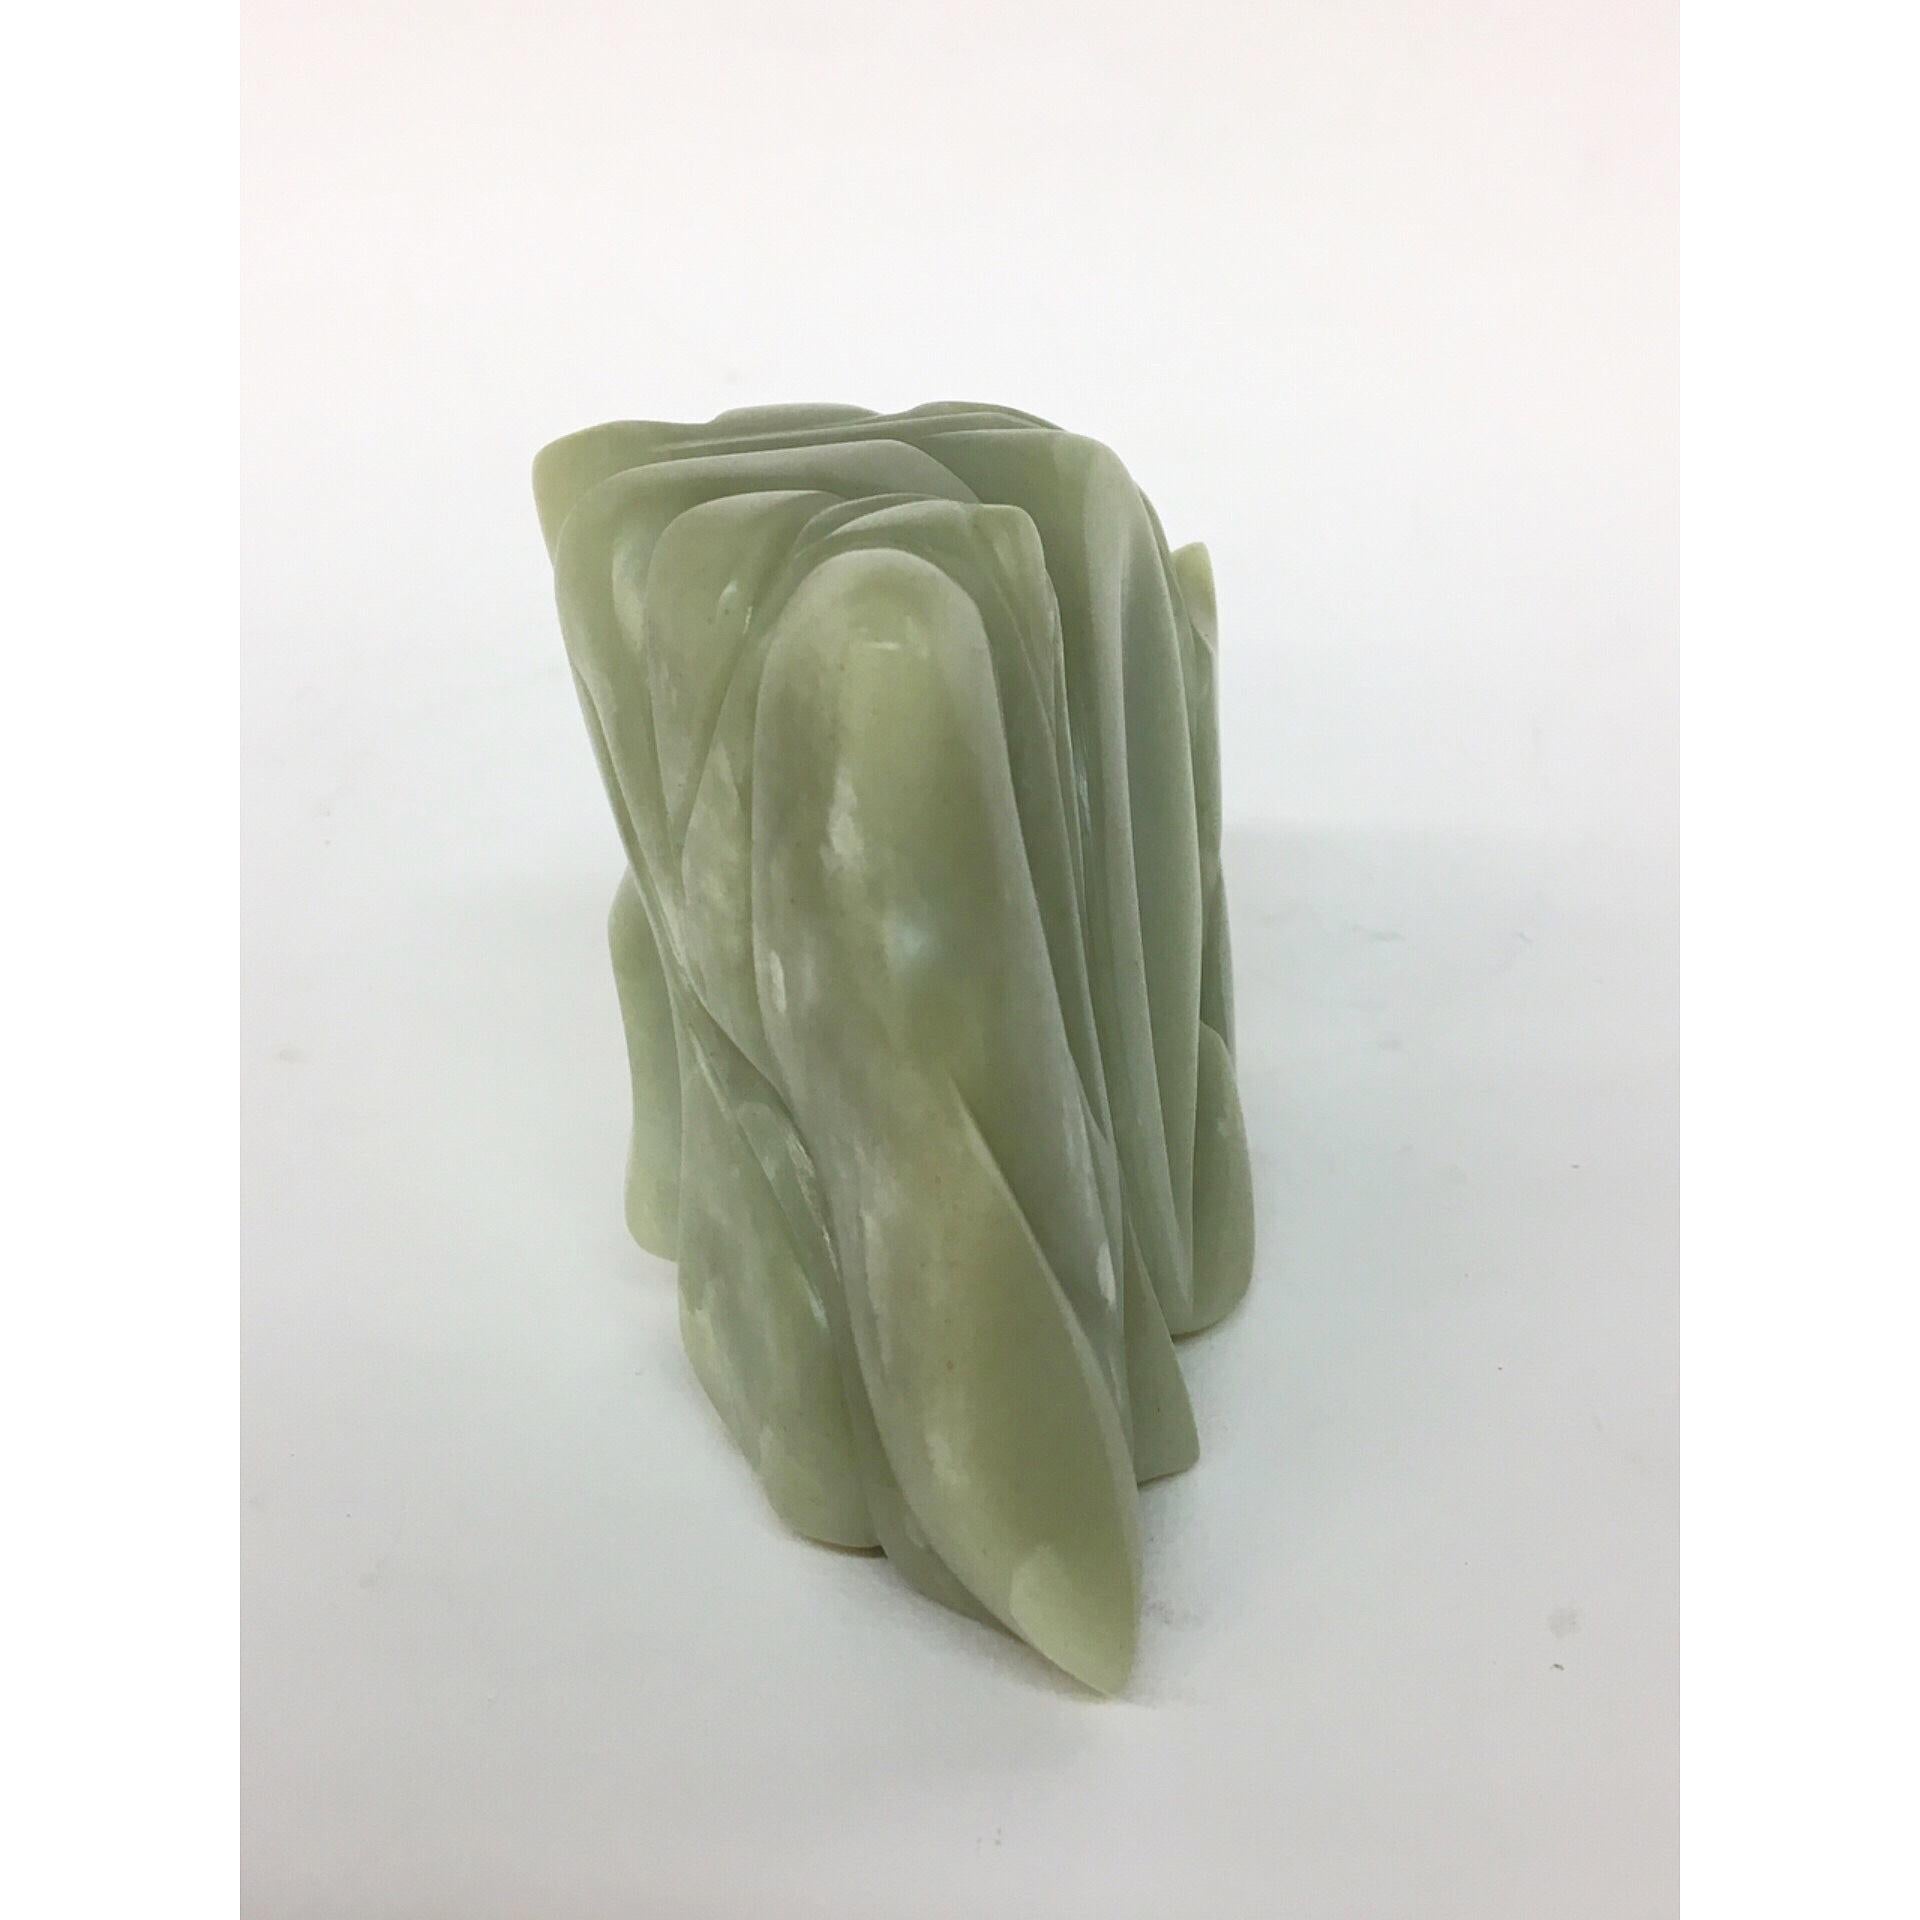 TANGLE Soapstone Sculpture 6 1/2 × 4 × 3 inch by Melanie Newcombe

Hand carved alabaster stone with or without the wooden base
The alabaster stone is reversible 

2018

* * * Melanie Newcombe * * *
Melanie Newcombe is an American sculptor who lives